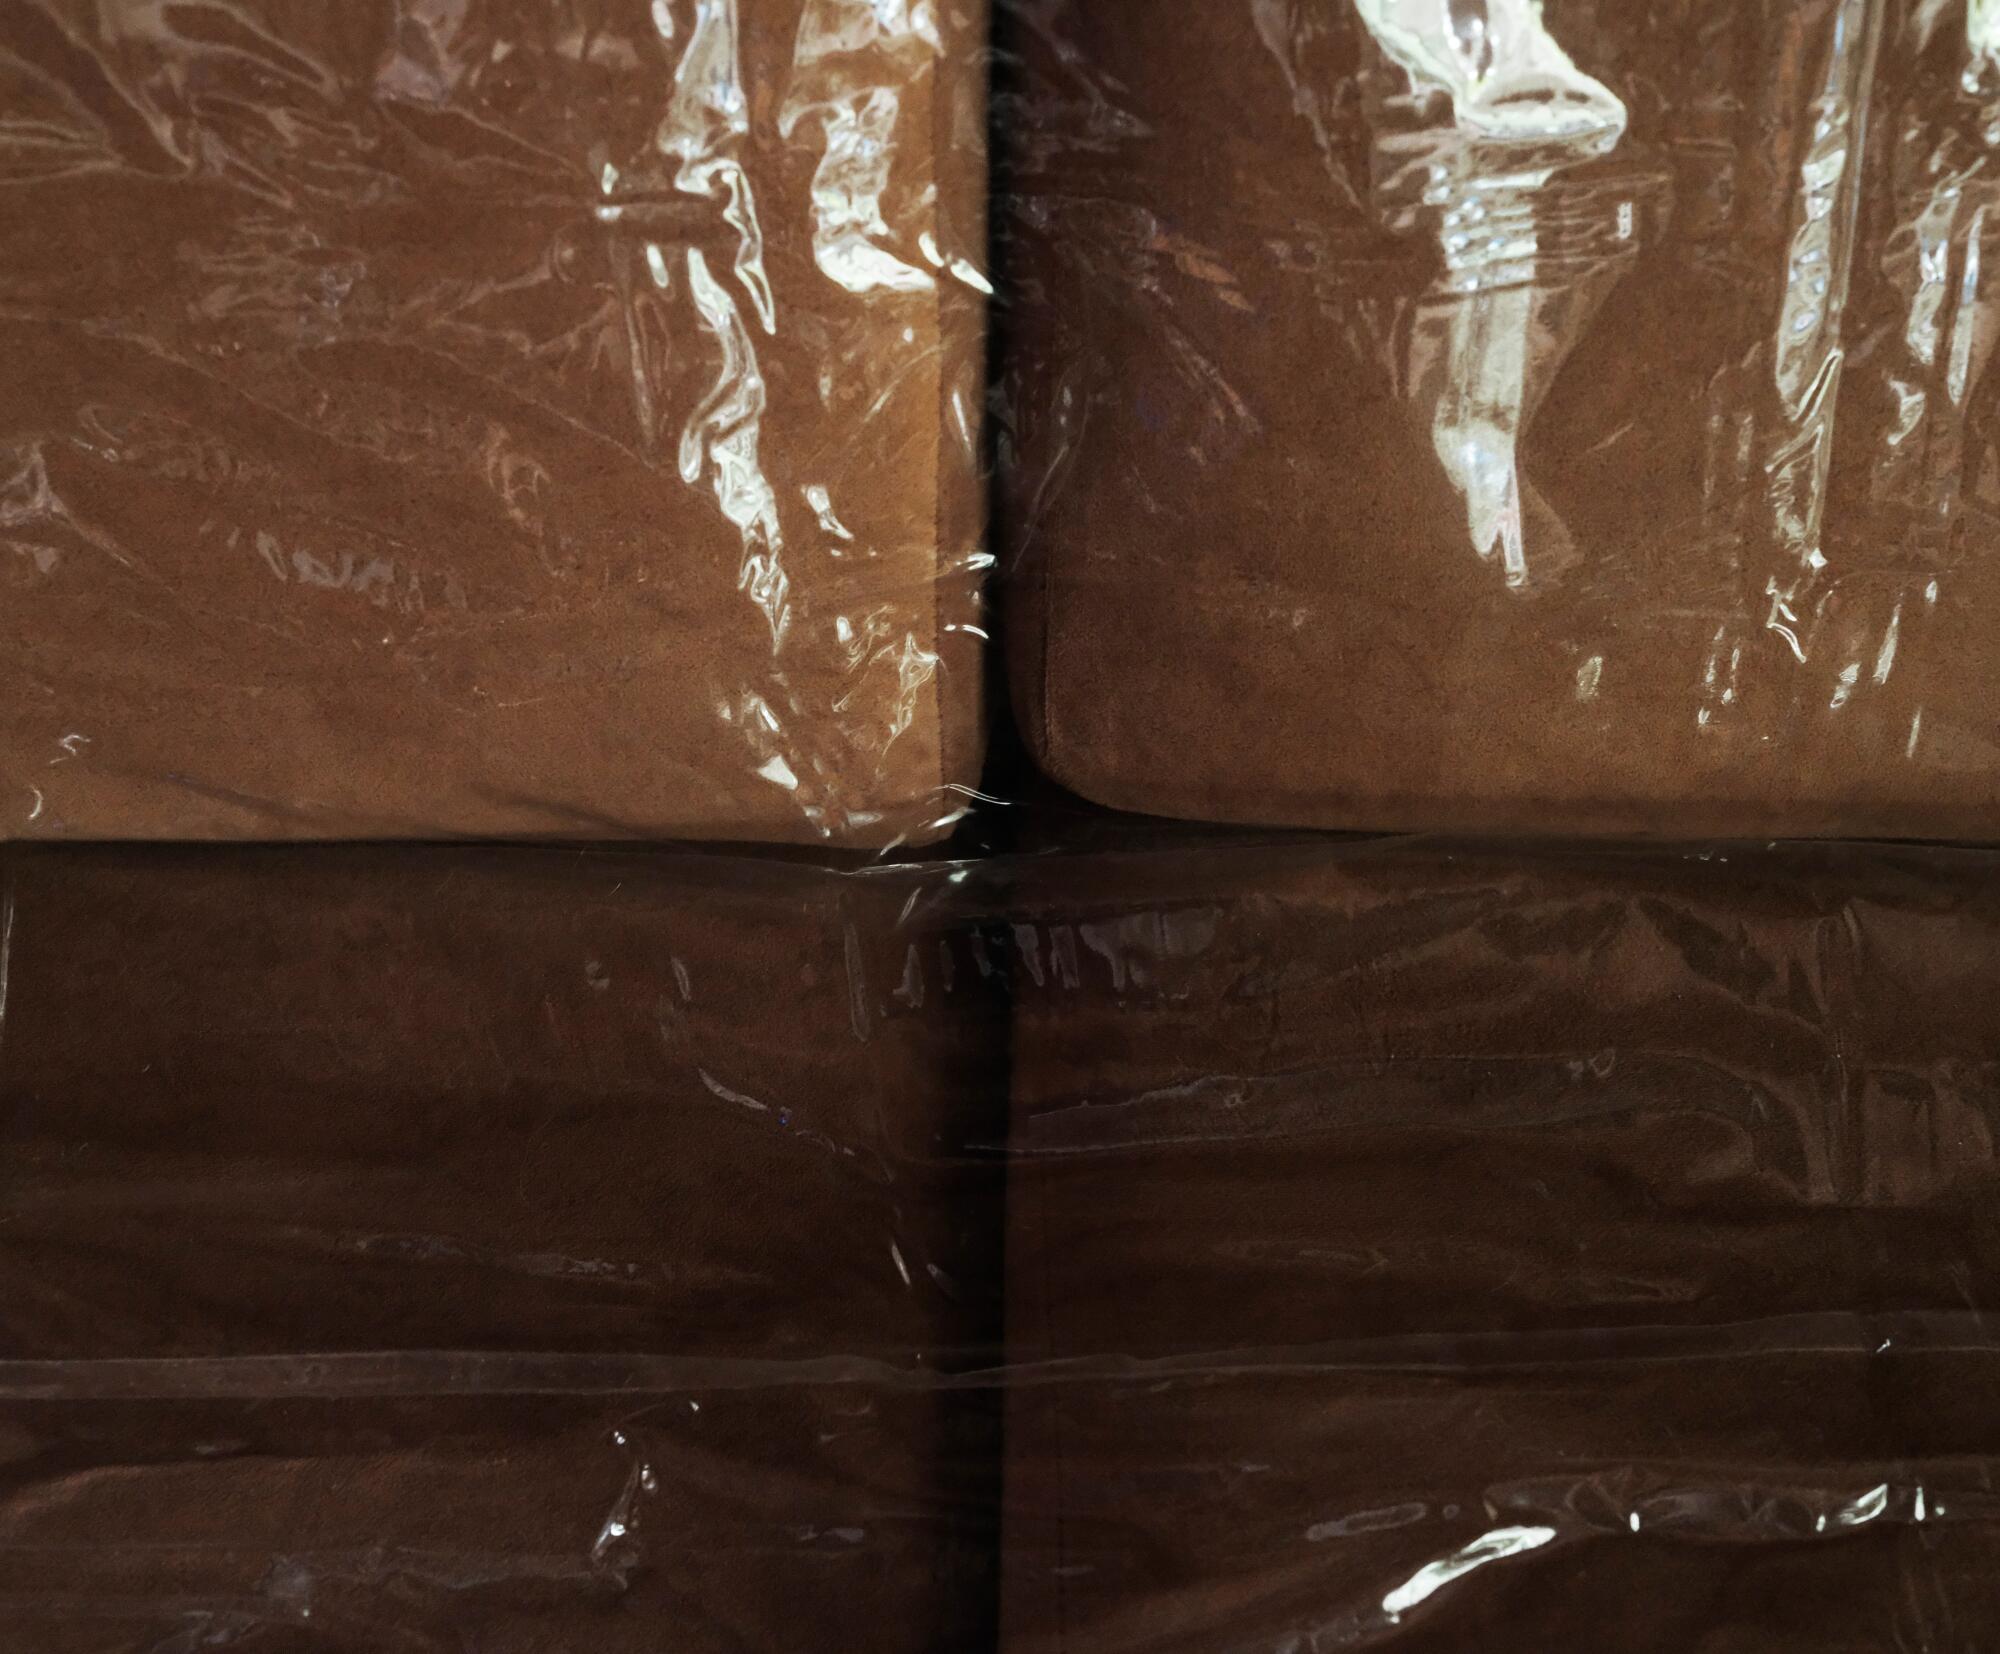 A close-up photo of a plastic-covered brown couch.